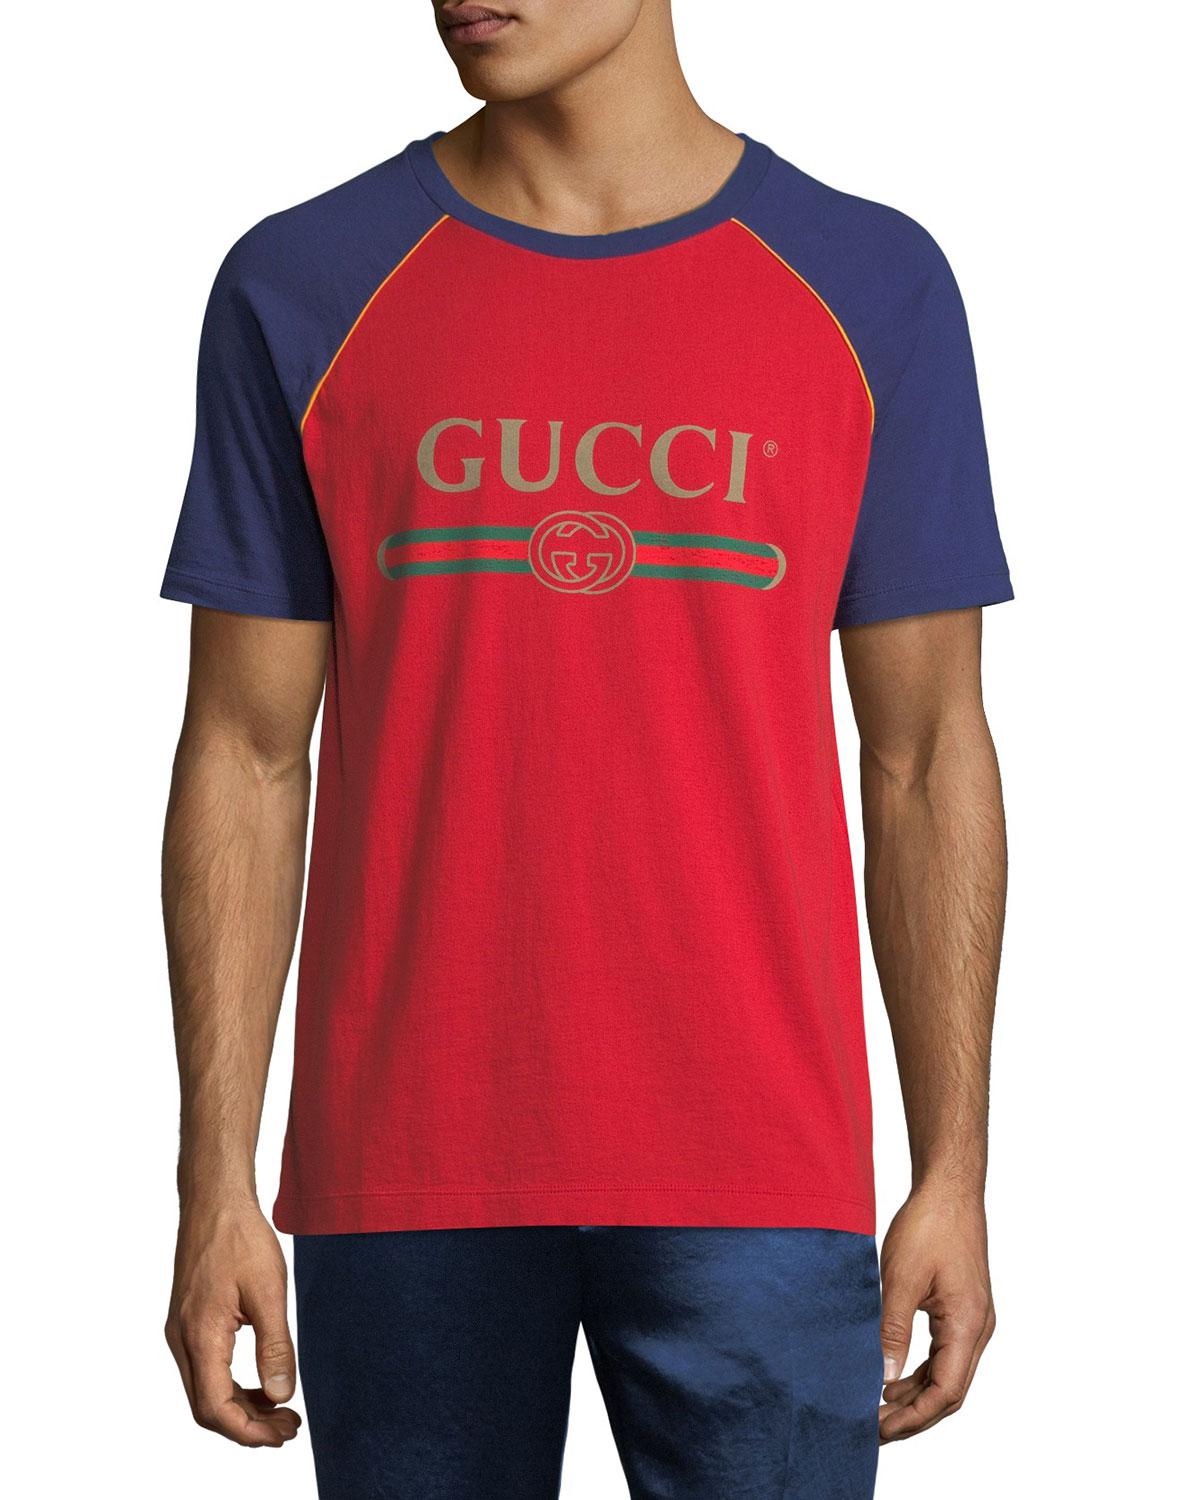 Lyst - Gucci Bicolor Logo Bicolor T-shirt in Red for Men